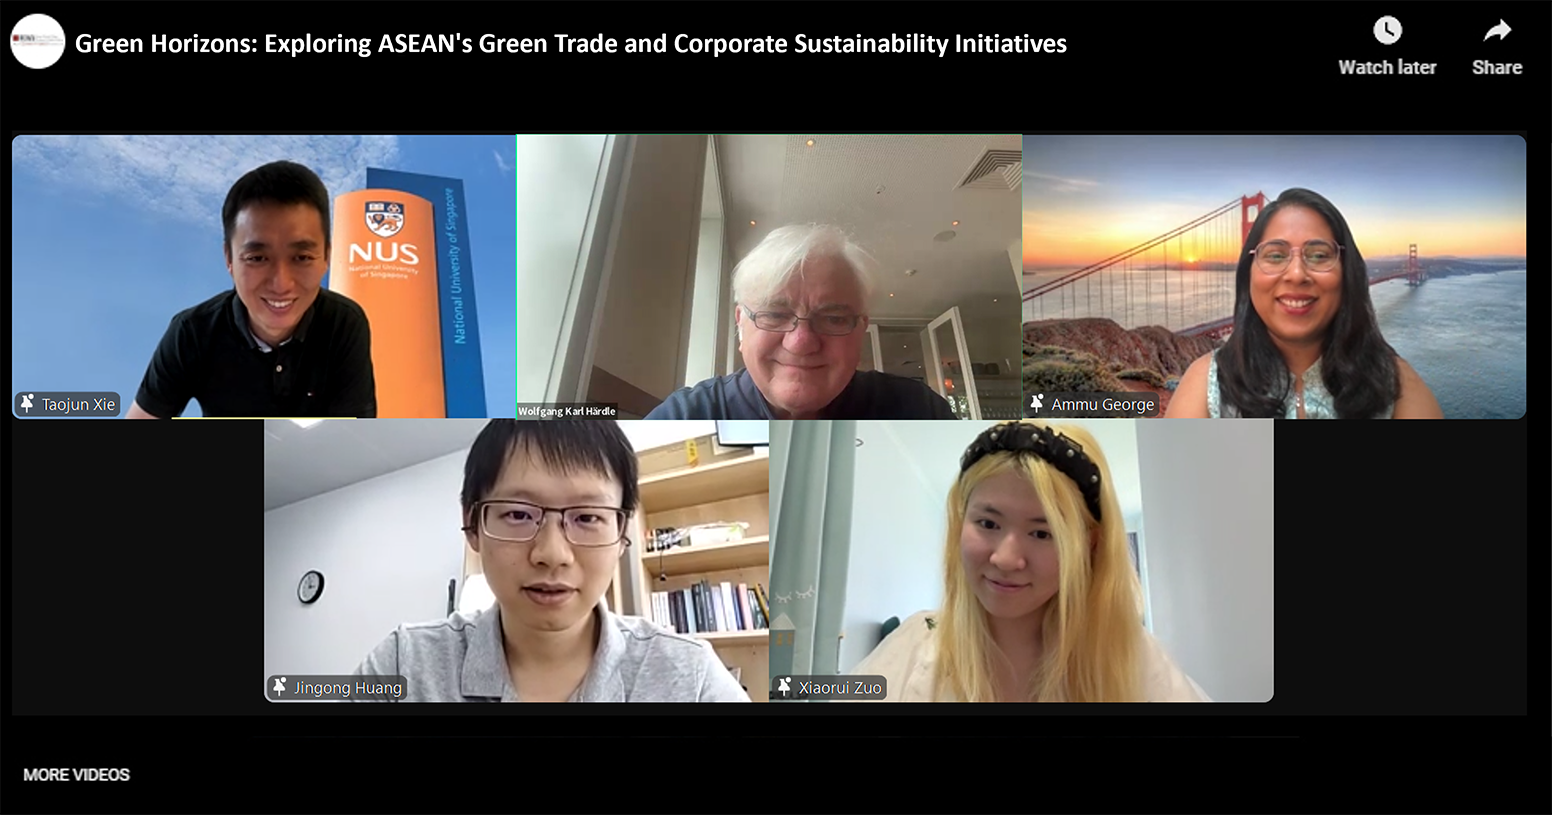 Green Horizons: Exploring ASEAN's Green Trade and Corporate Sustainability Initiatives